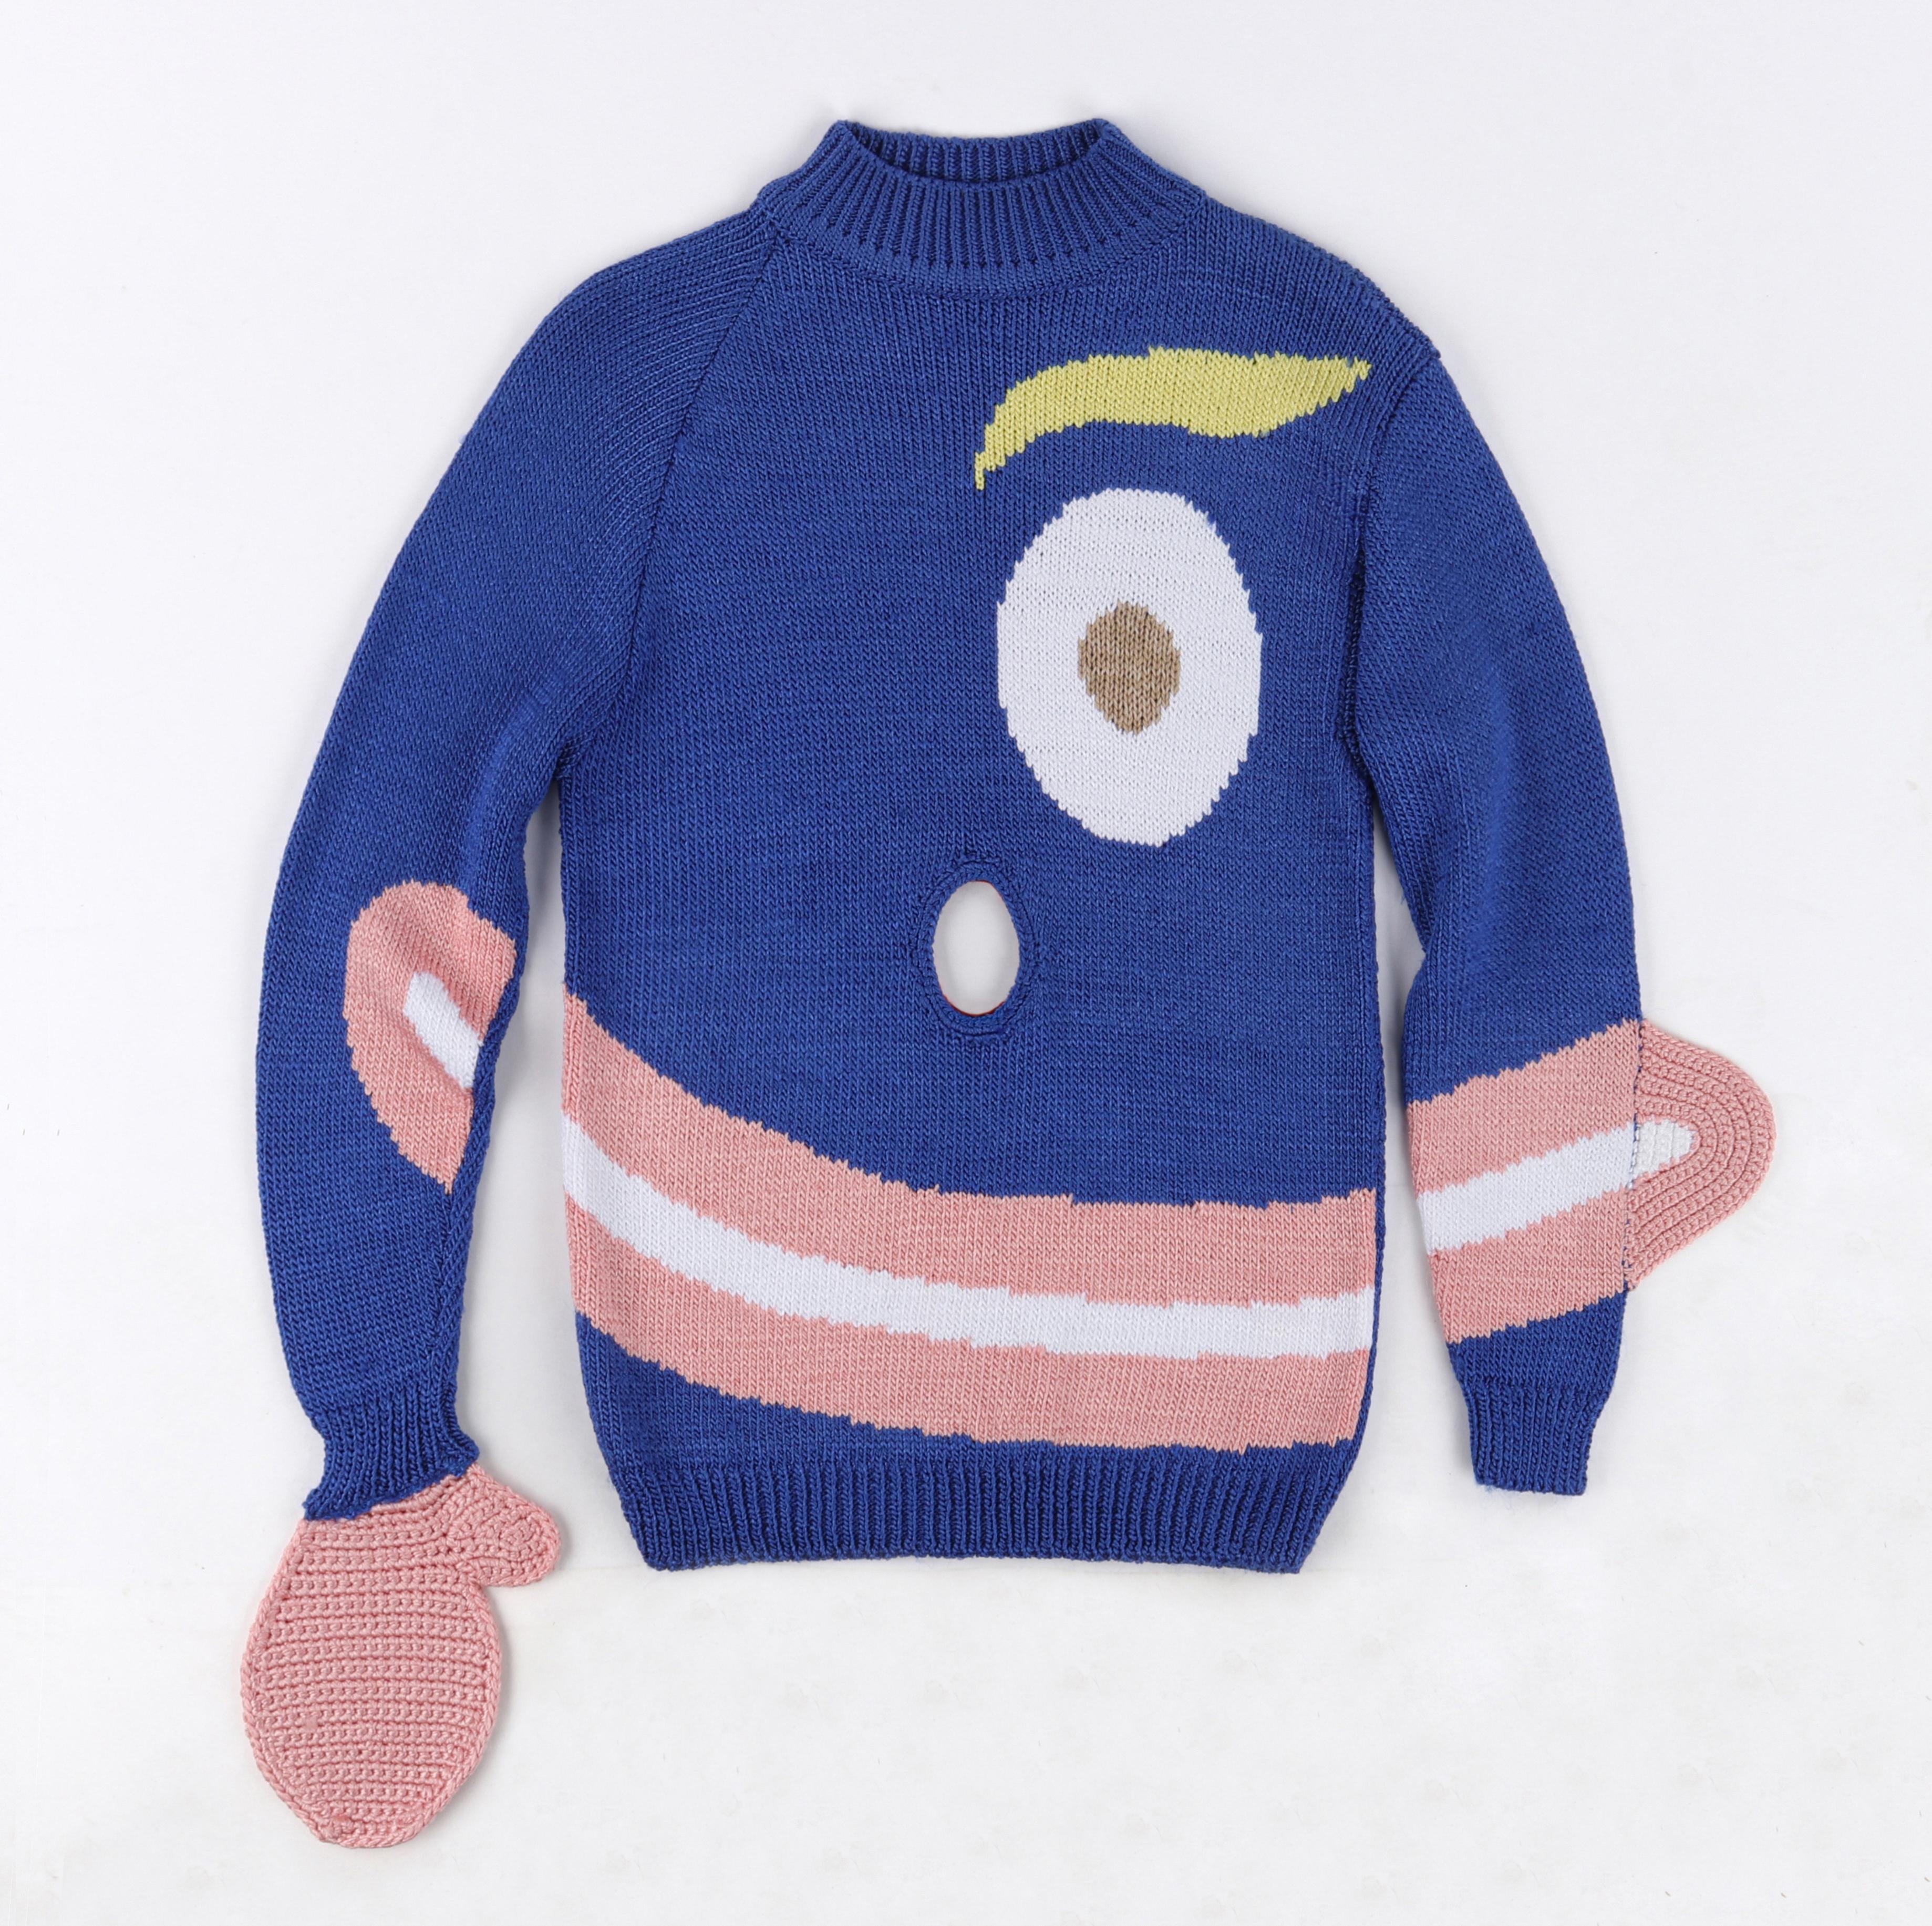 SURVIVAL OF THE FASHIONEST S/S 2020 Blue Knit Smiley Face Pullover Sweater Top

Brand / Manufacturer: Survival of the Fashionest
Collection: S/S 2020
Designer: Joost Jansen
Style: Pullover Sweater
Color(s): Shades of Blue, White, Pink, Yellow, Red,